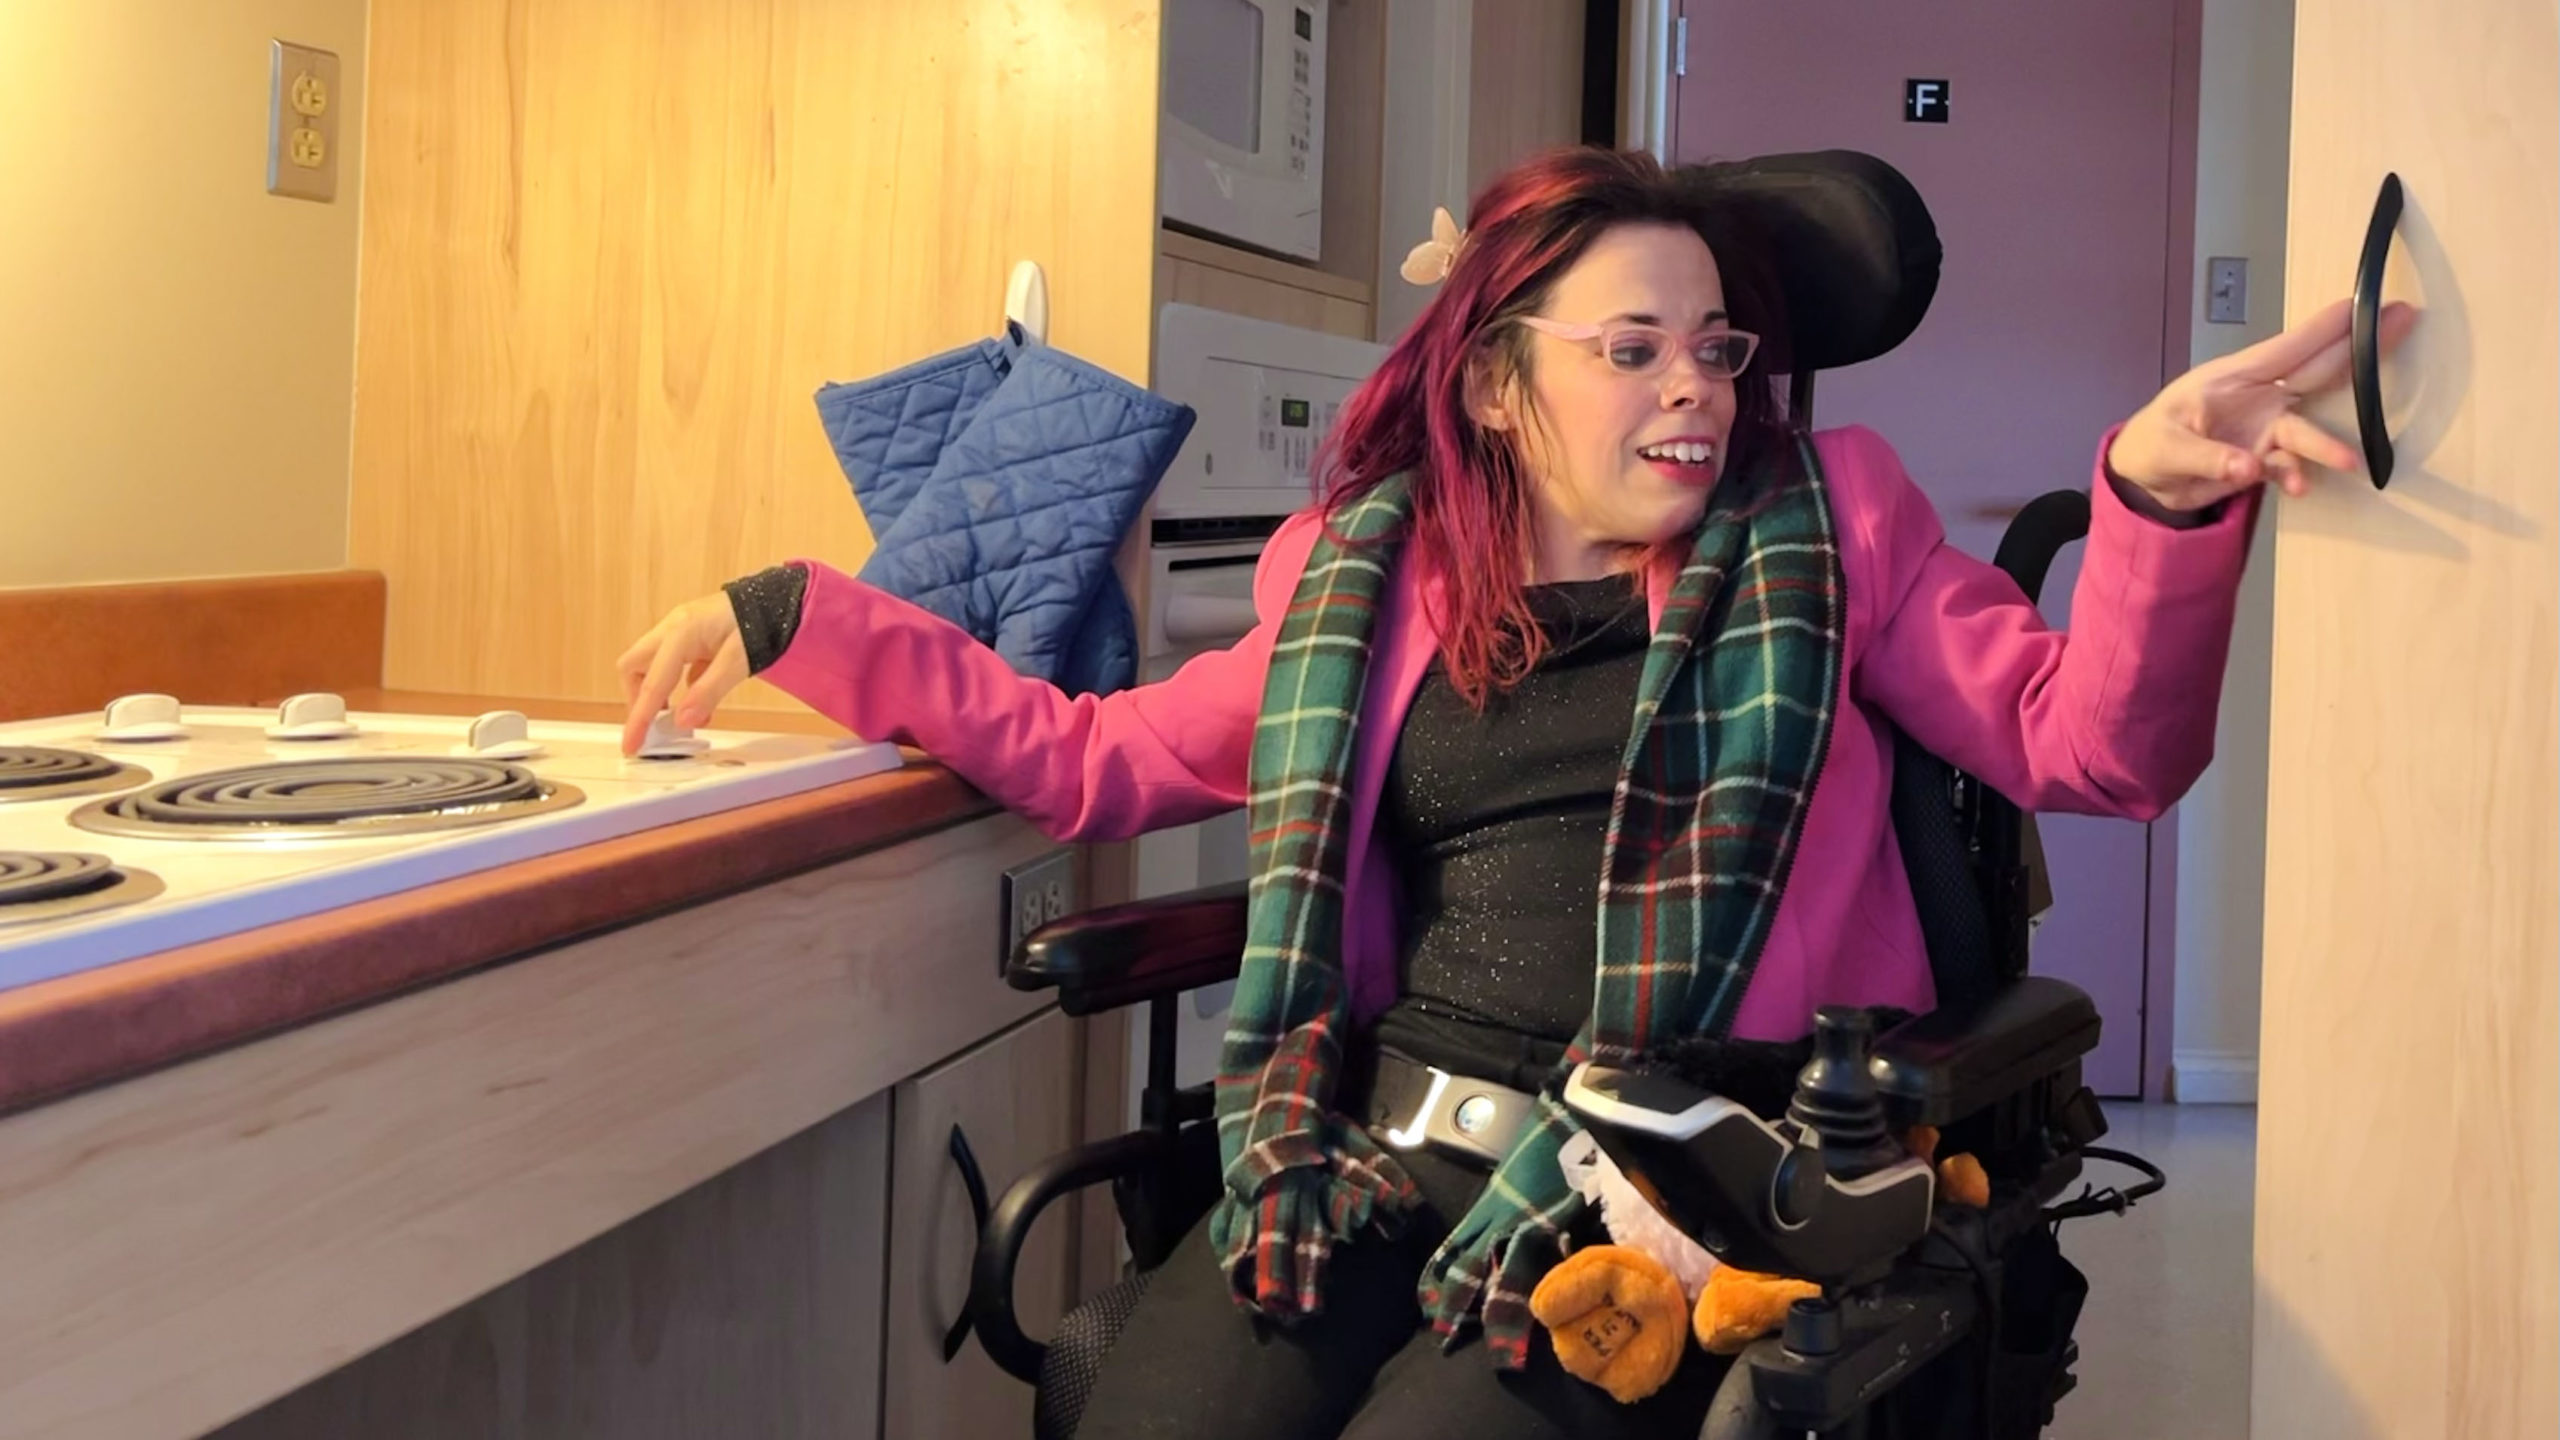 Carrie-Ann Bugden opens the cupboard and turns on the stove in her kitchen. She is in her wheelchair, wearing a pink blazer, black shirt, and Newfoundland scarf. In her lap is a puffin stuffed animal, representing her home province.